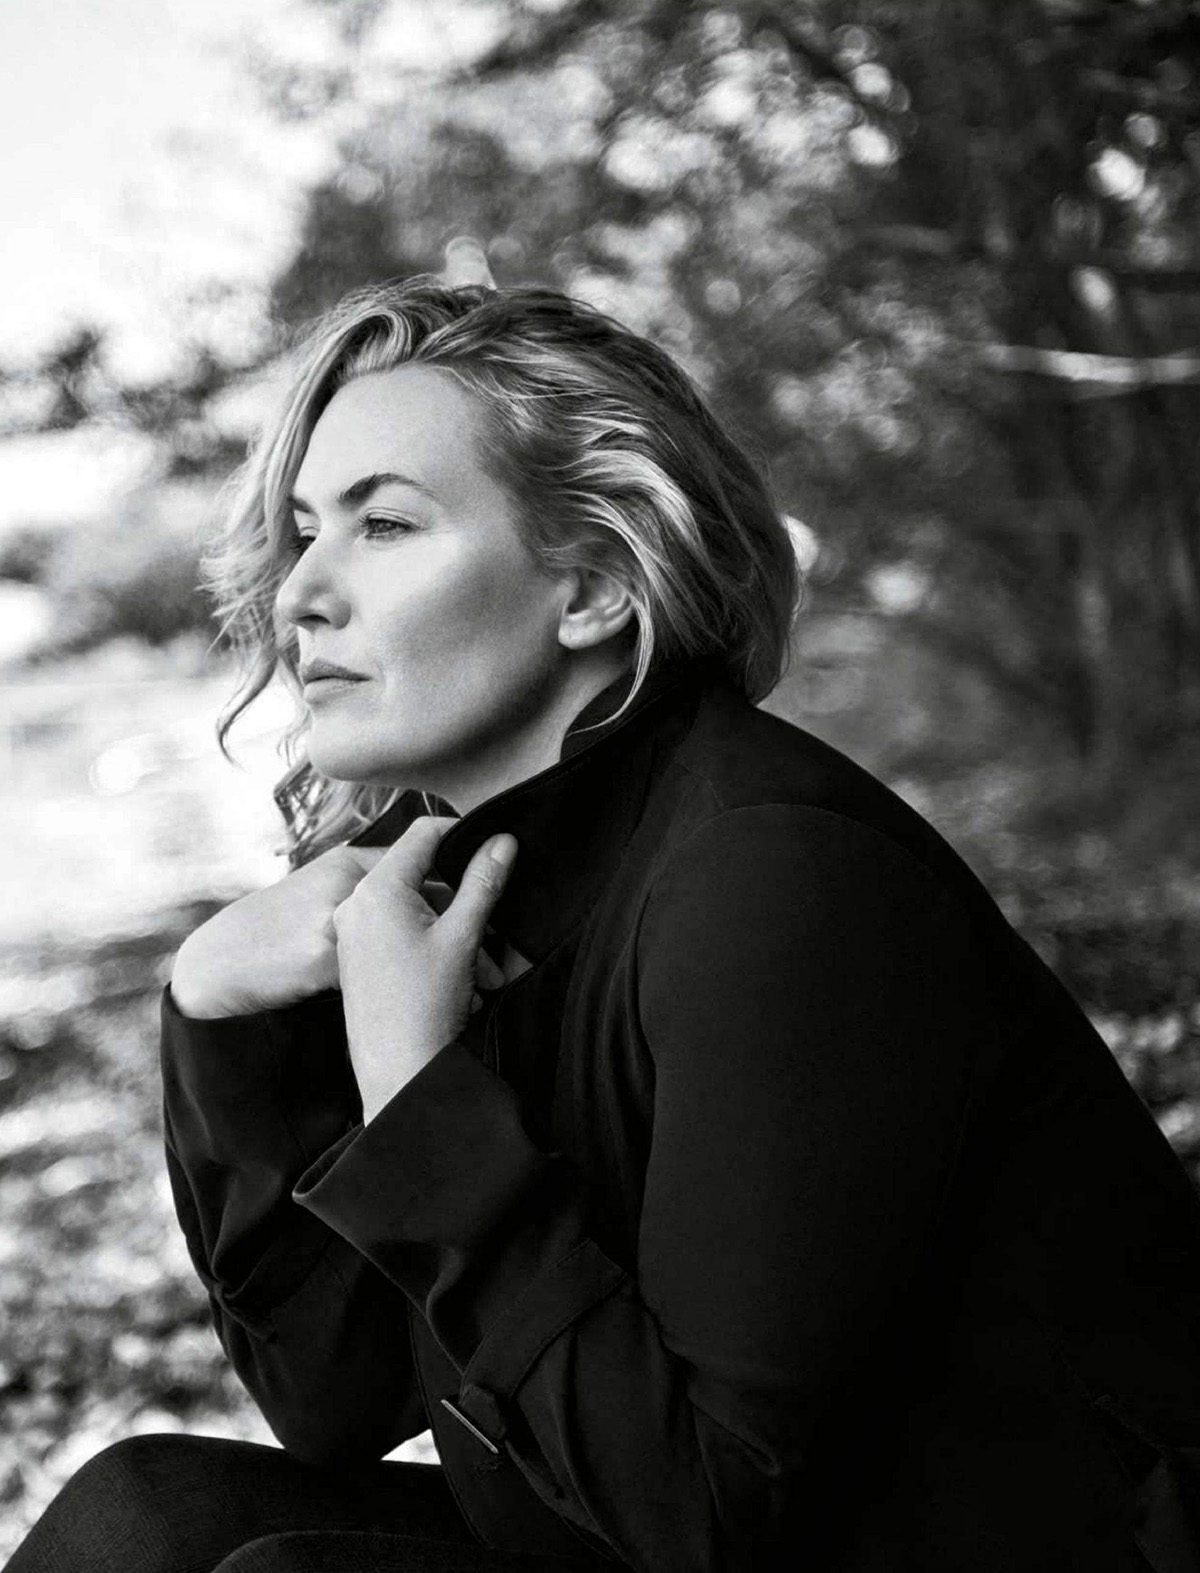 Kate Winslet covers Elle France February 17th, 2022 by Jason Bell